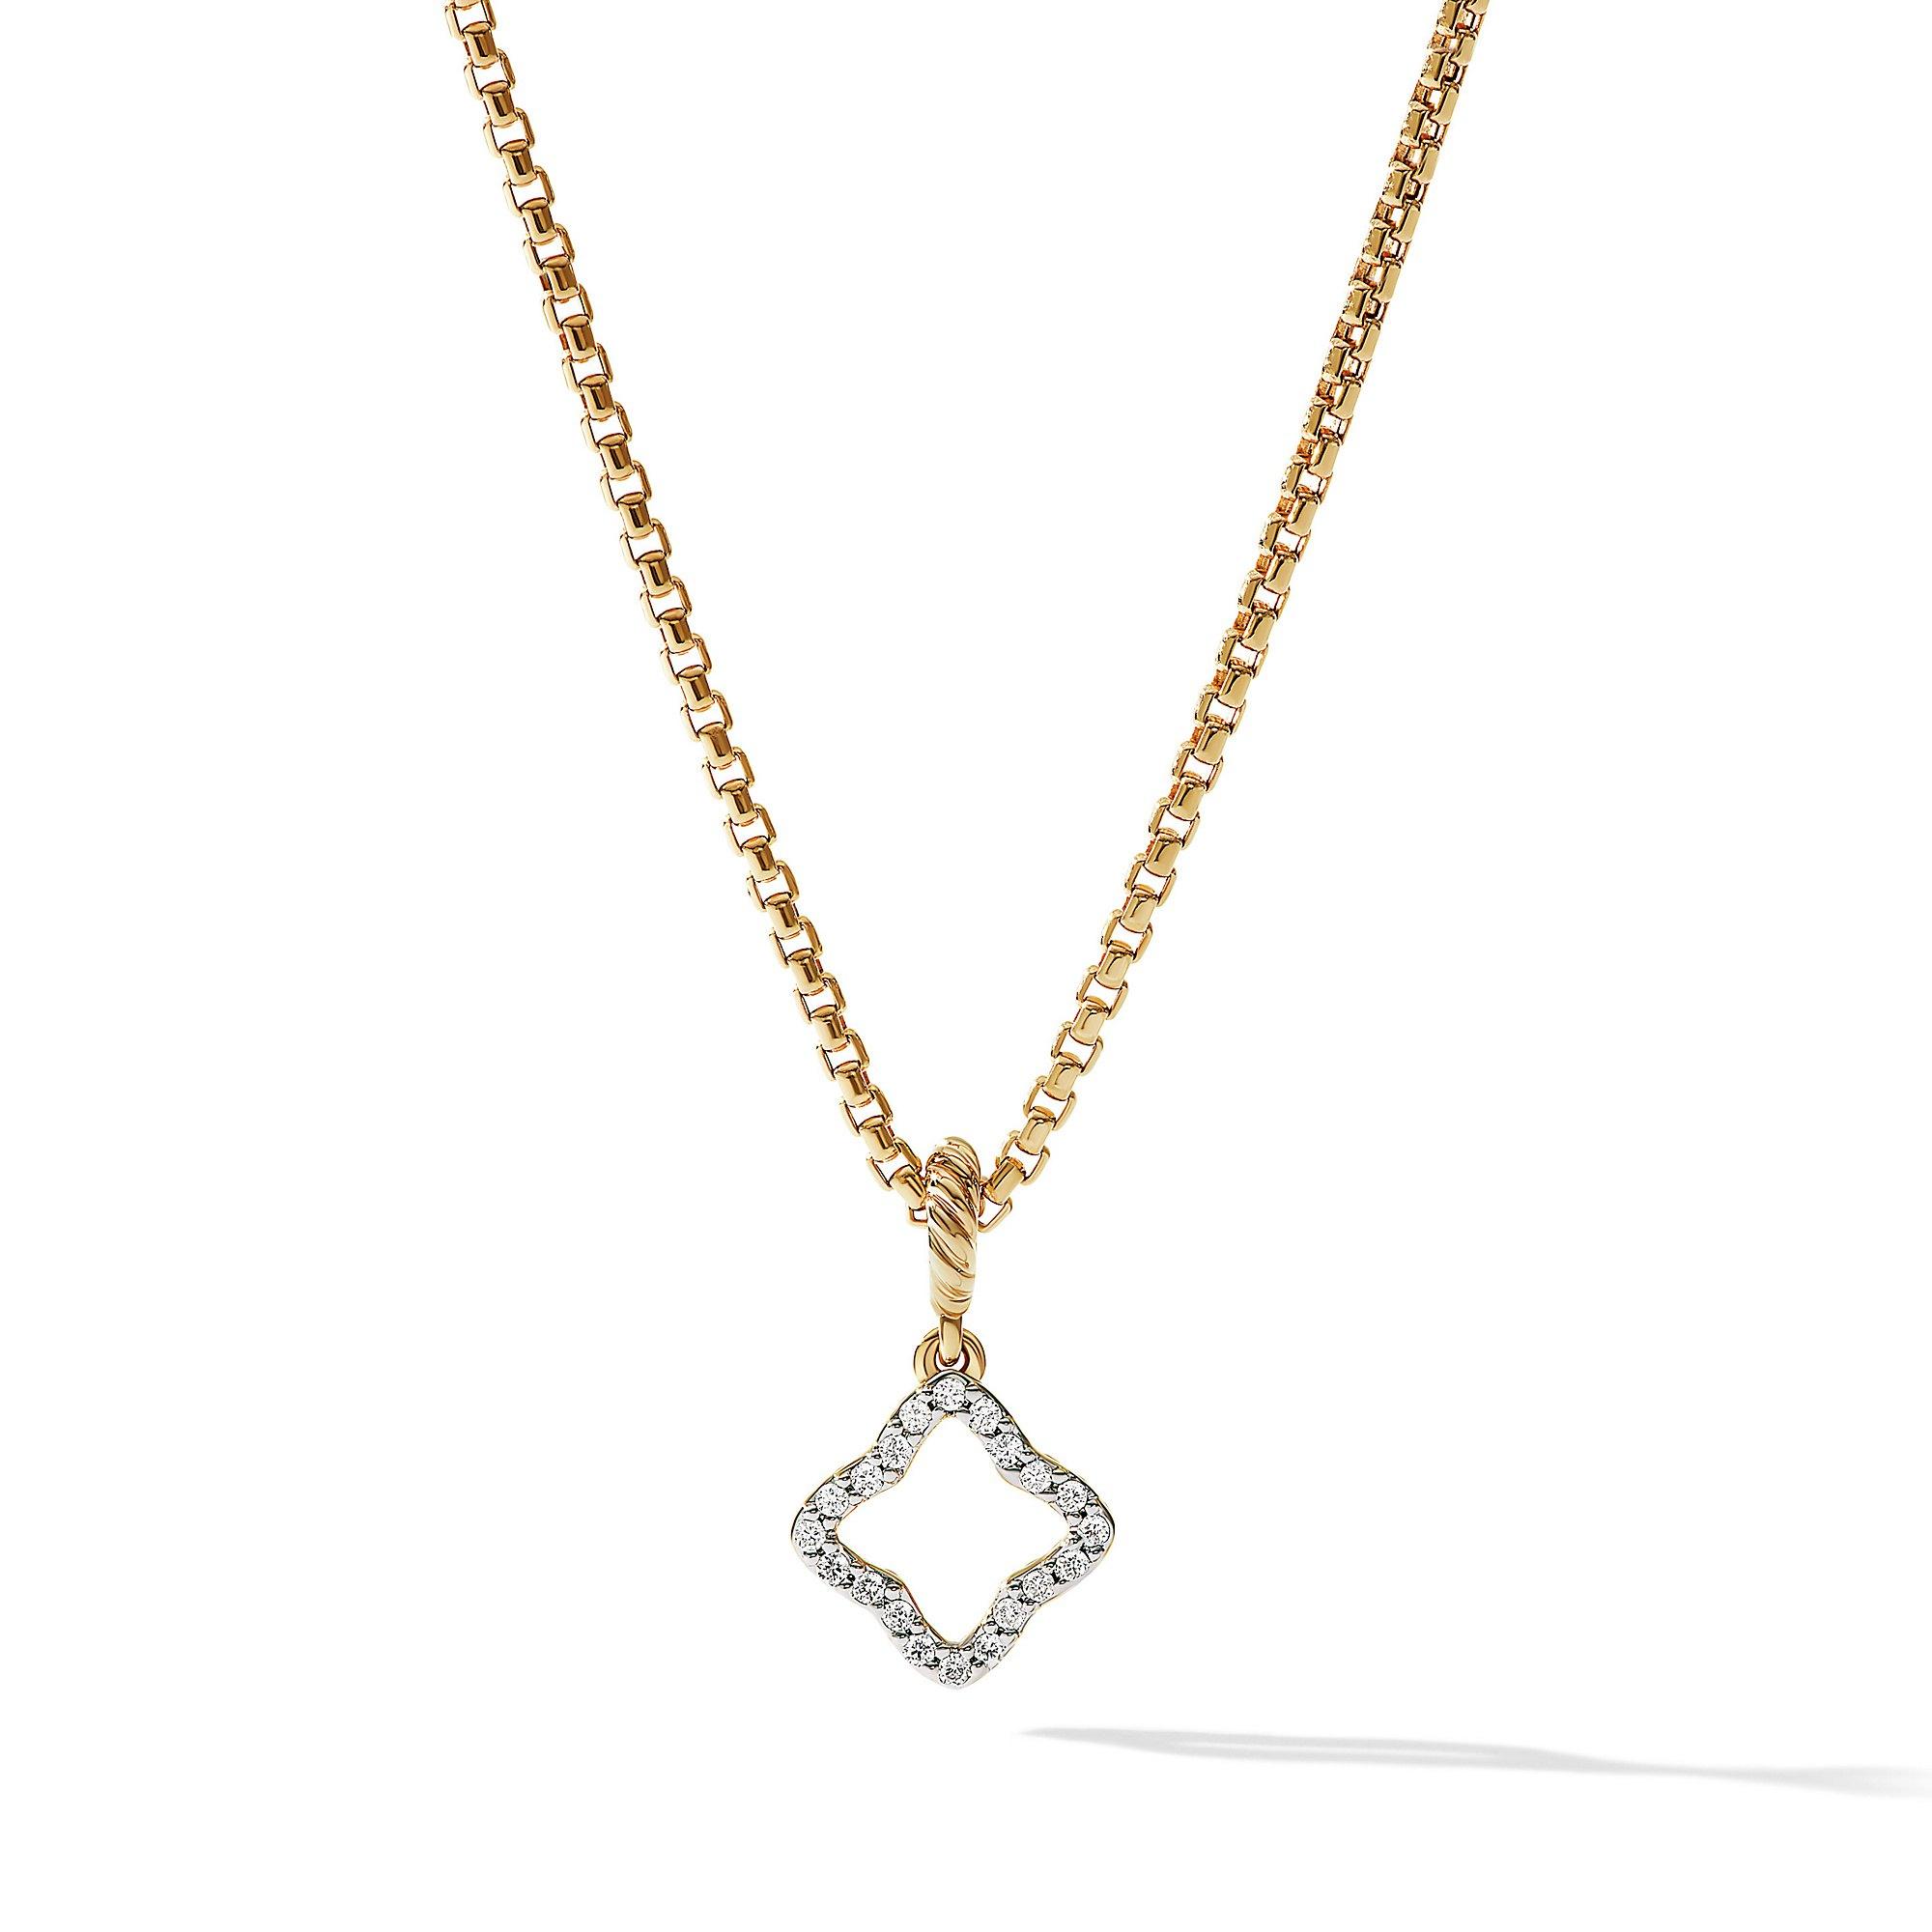 David Yurman Quatrefoil Amulet in 18K Yellow Gold with Pave Diamonds | Front View
